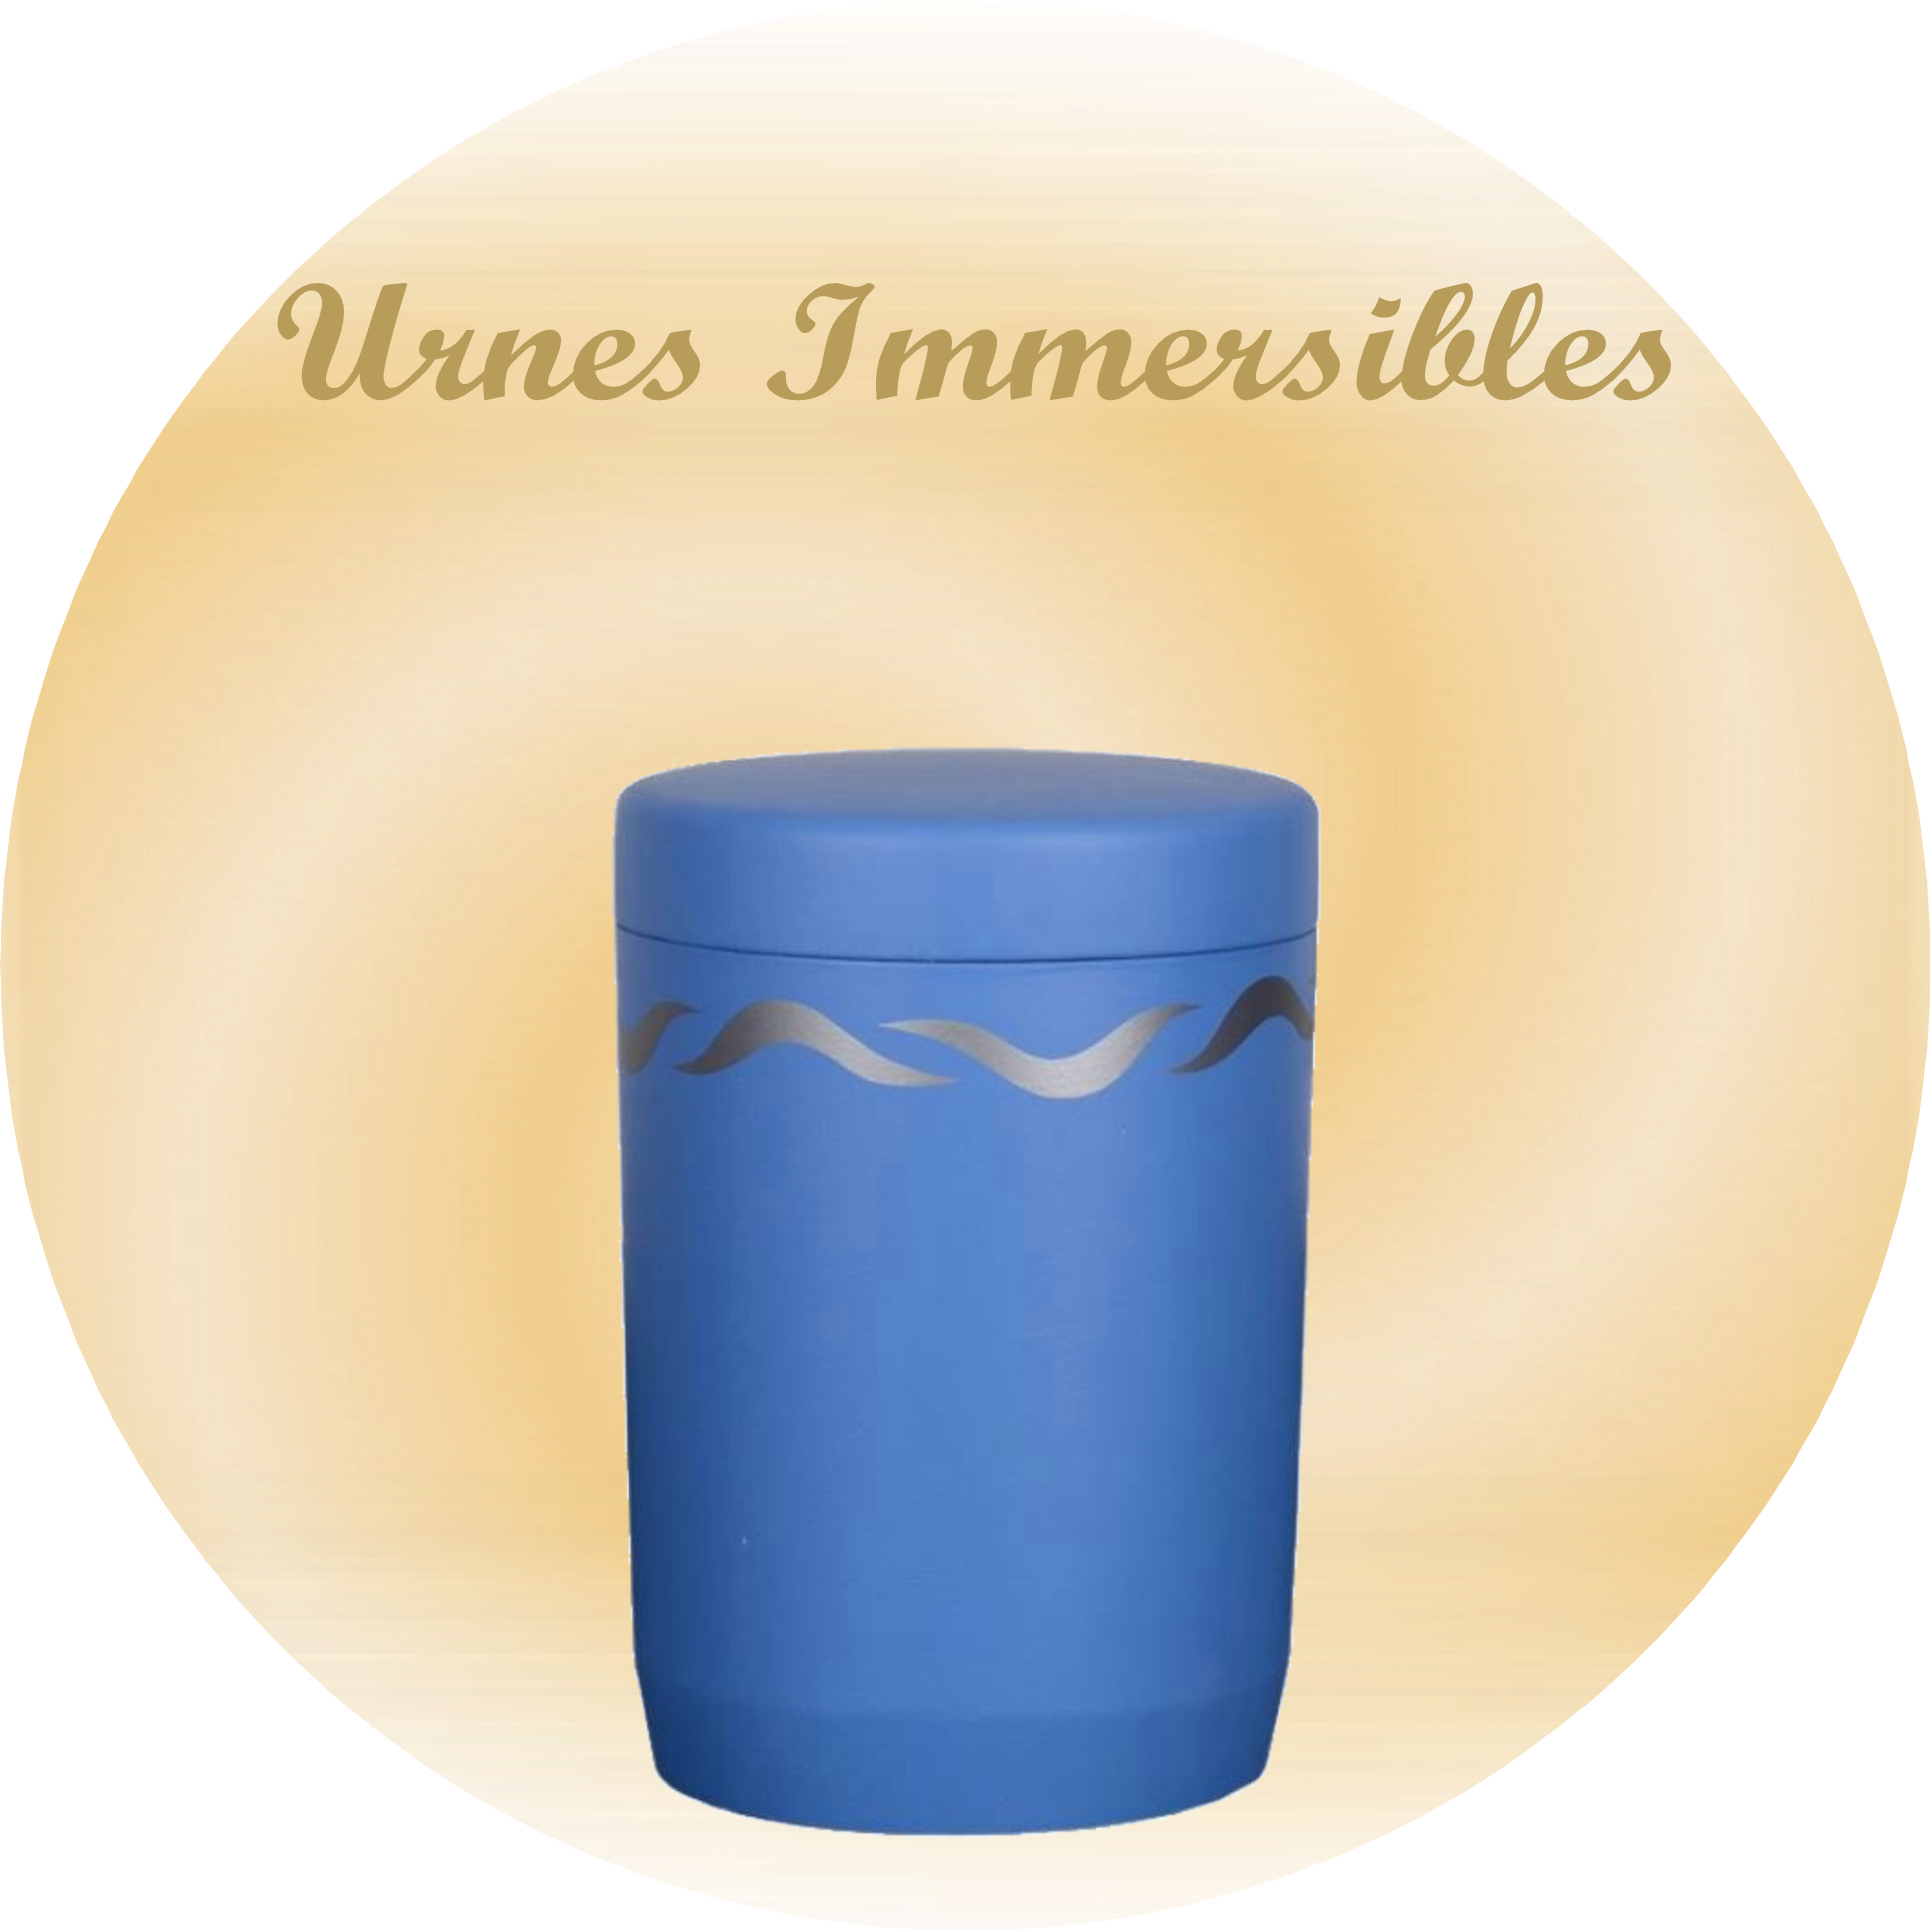 URNE FUNERAIRE IMMERSIBLE GIGNAC